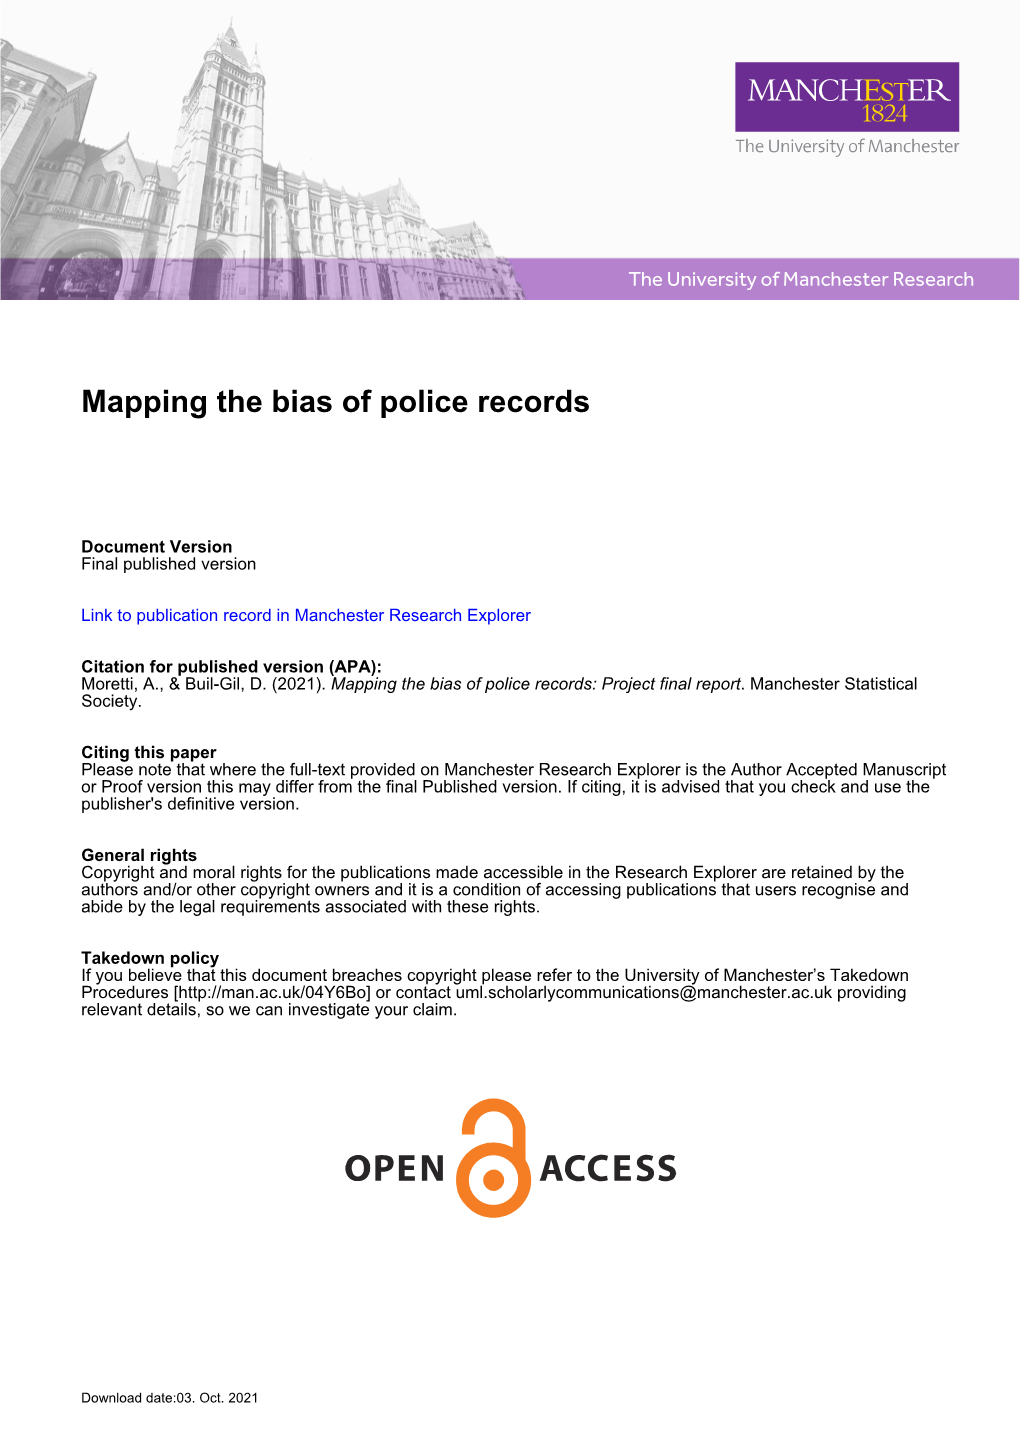 Mapping the Bias of Police Records